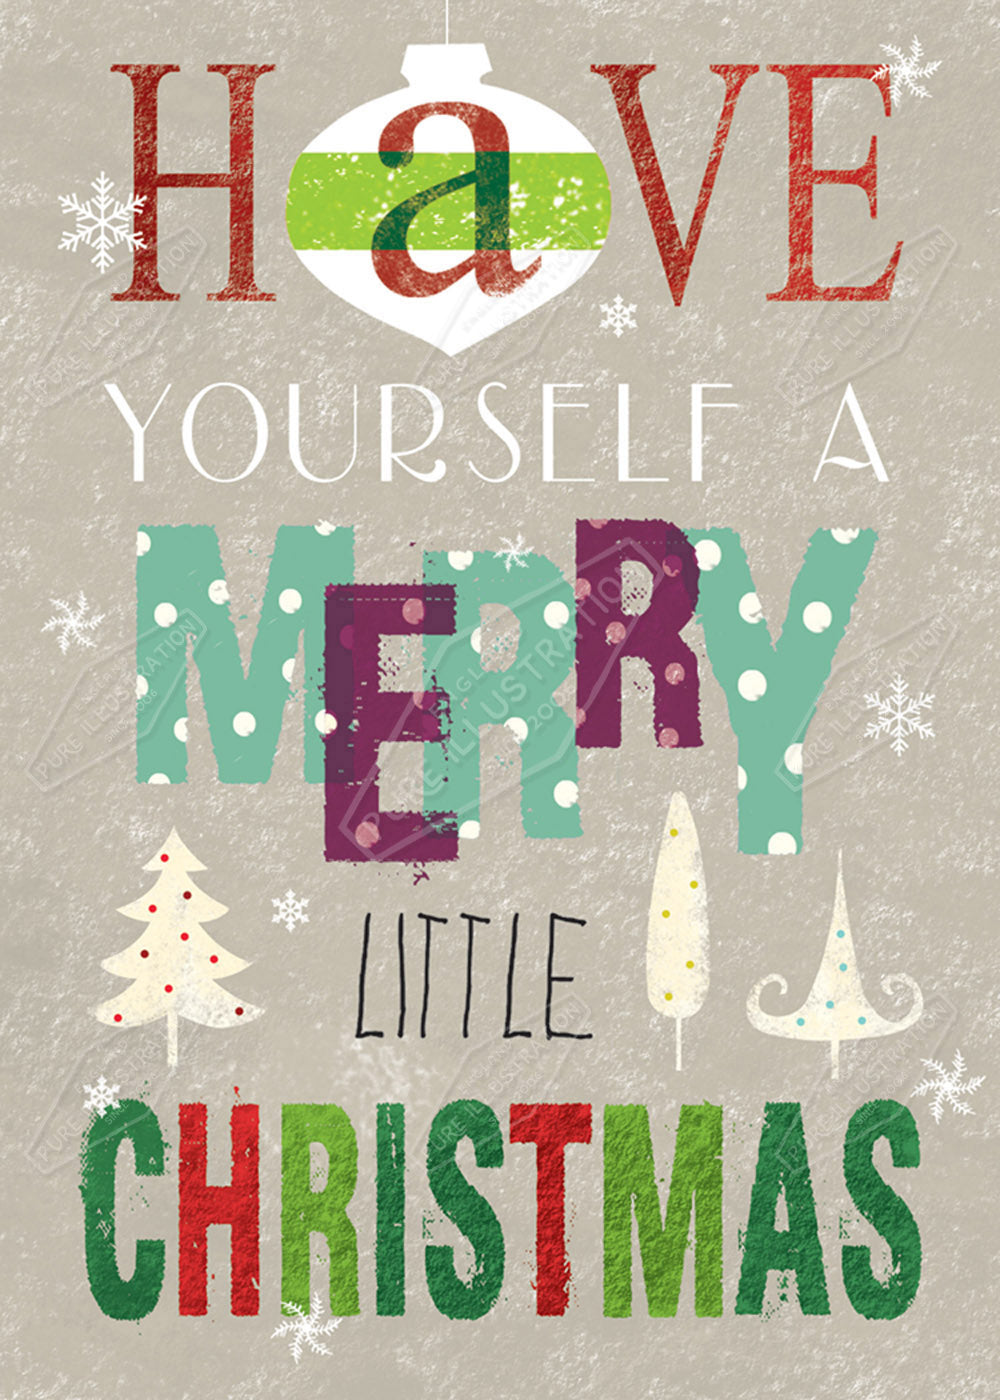 00029601CRE Christmas Text Design by Cory Reid for Pure Art Licensing Agency